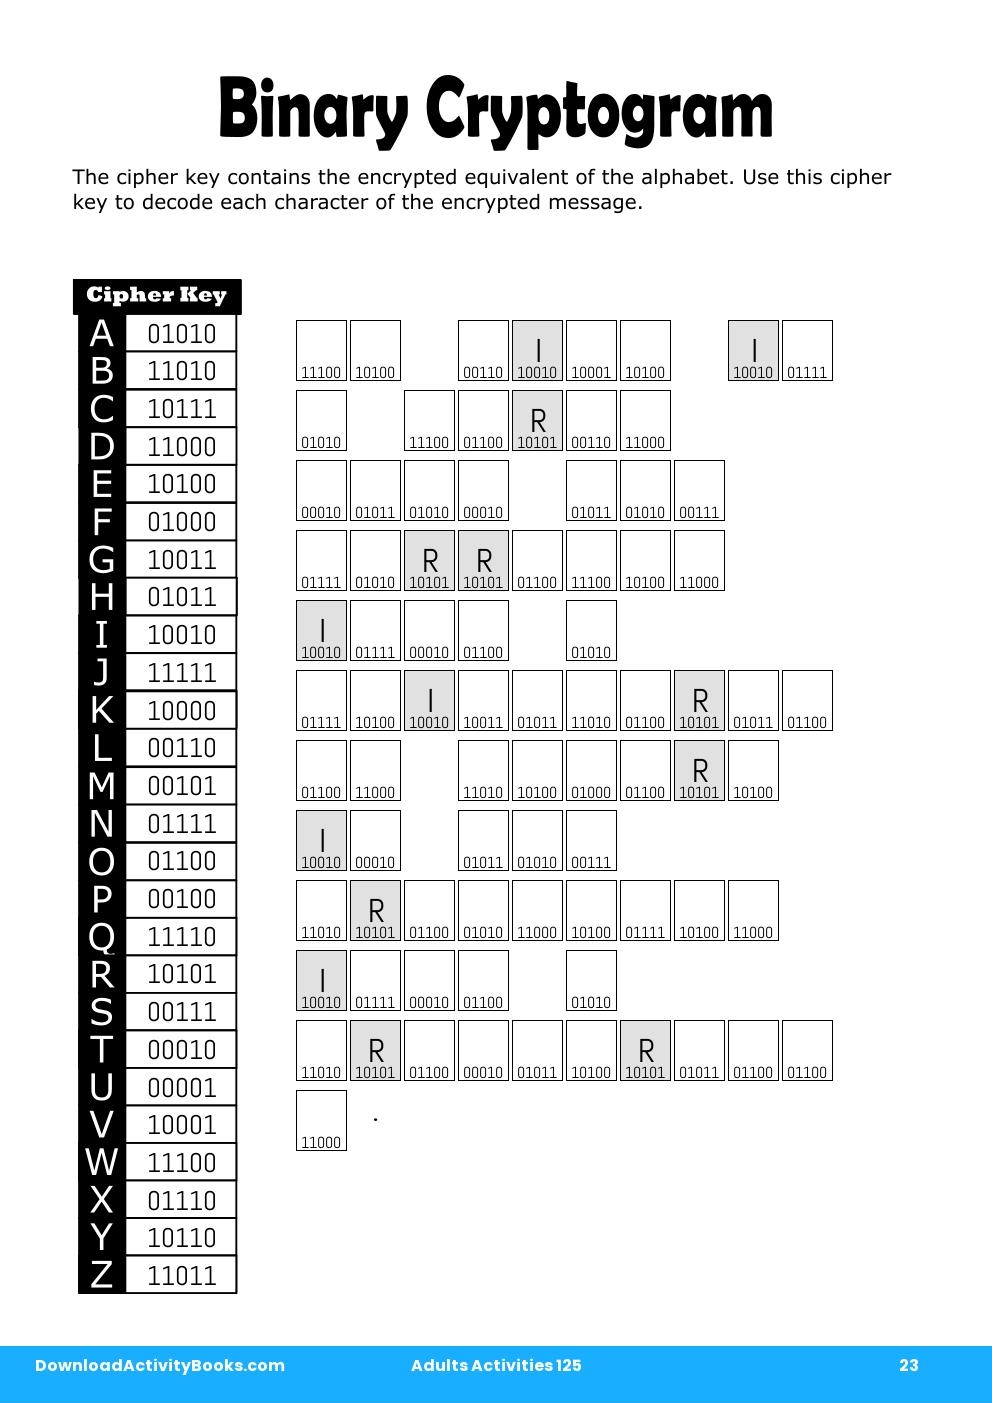 Binary Cryptogram in Adults Activities 125